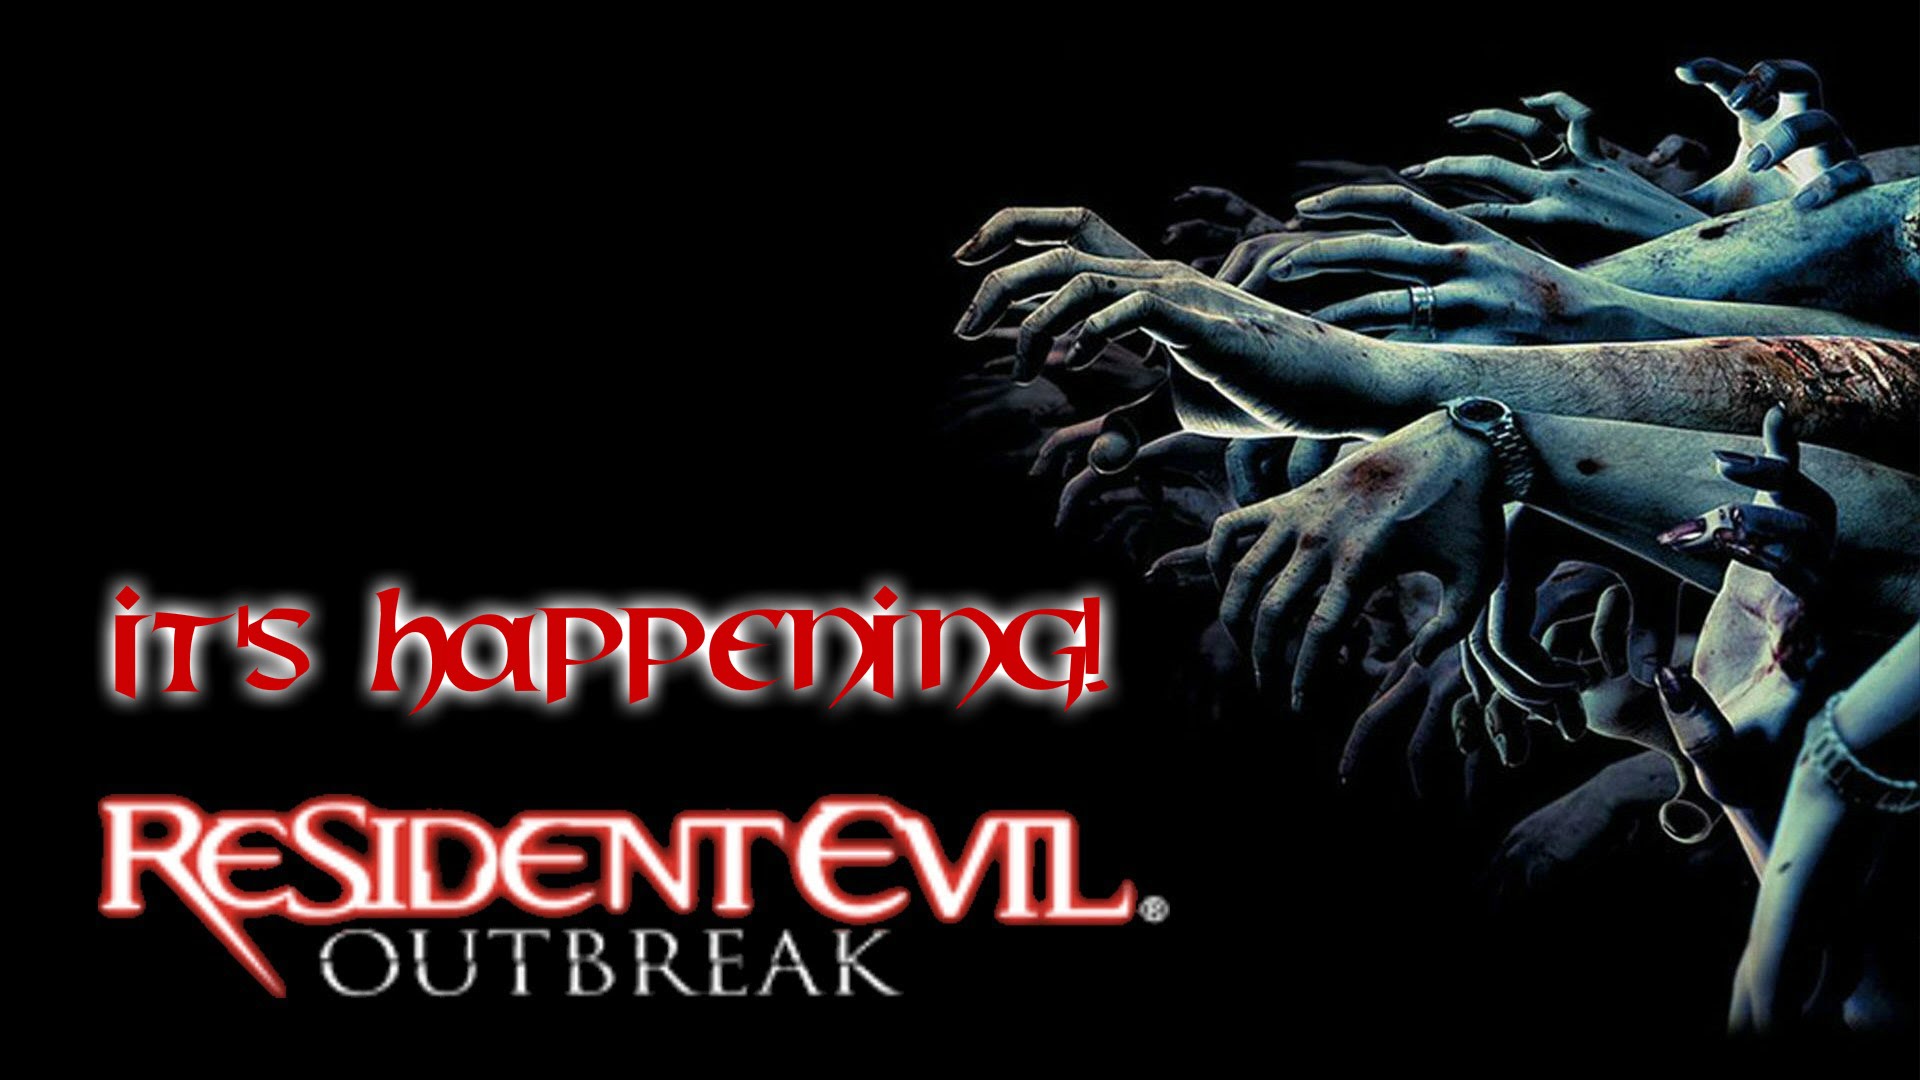 Nice Images Collection: Resident Evil Outbreak Desktop Wallpapers